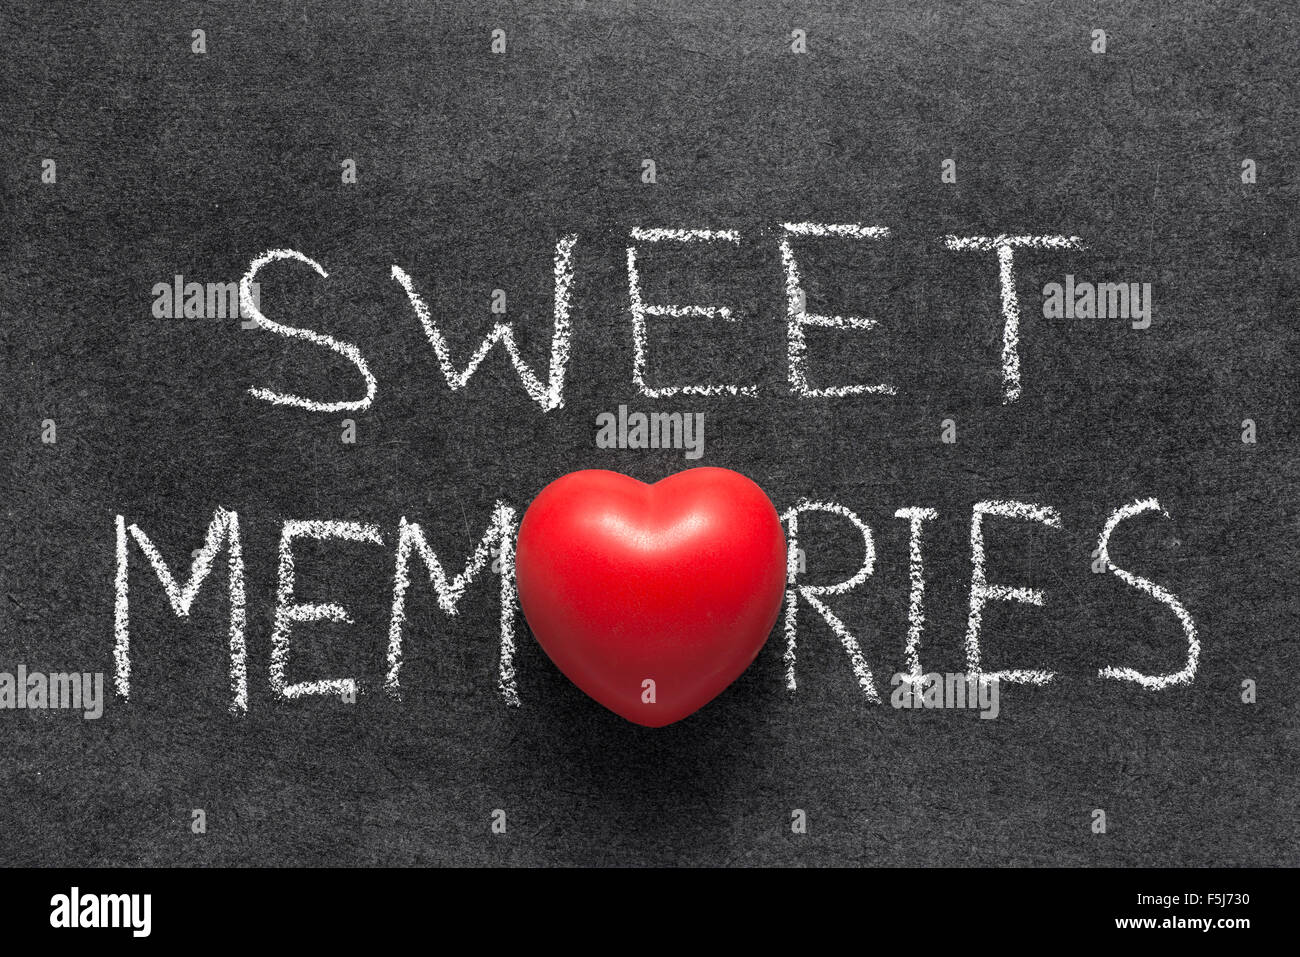 sweet memories phrase handwritten on chalkboard with red heart used instead of O Stock Photo